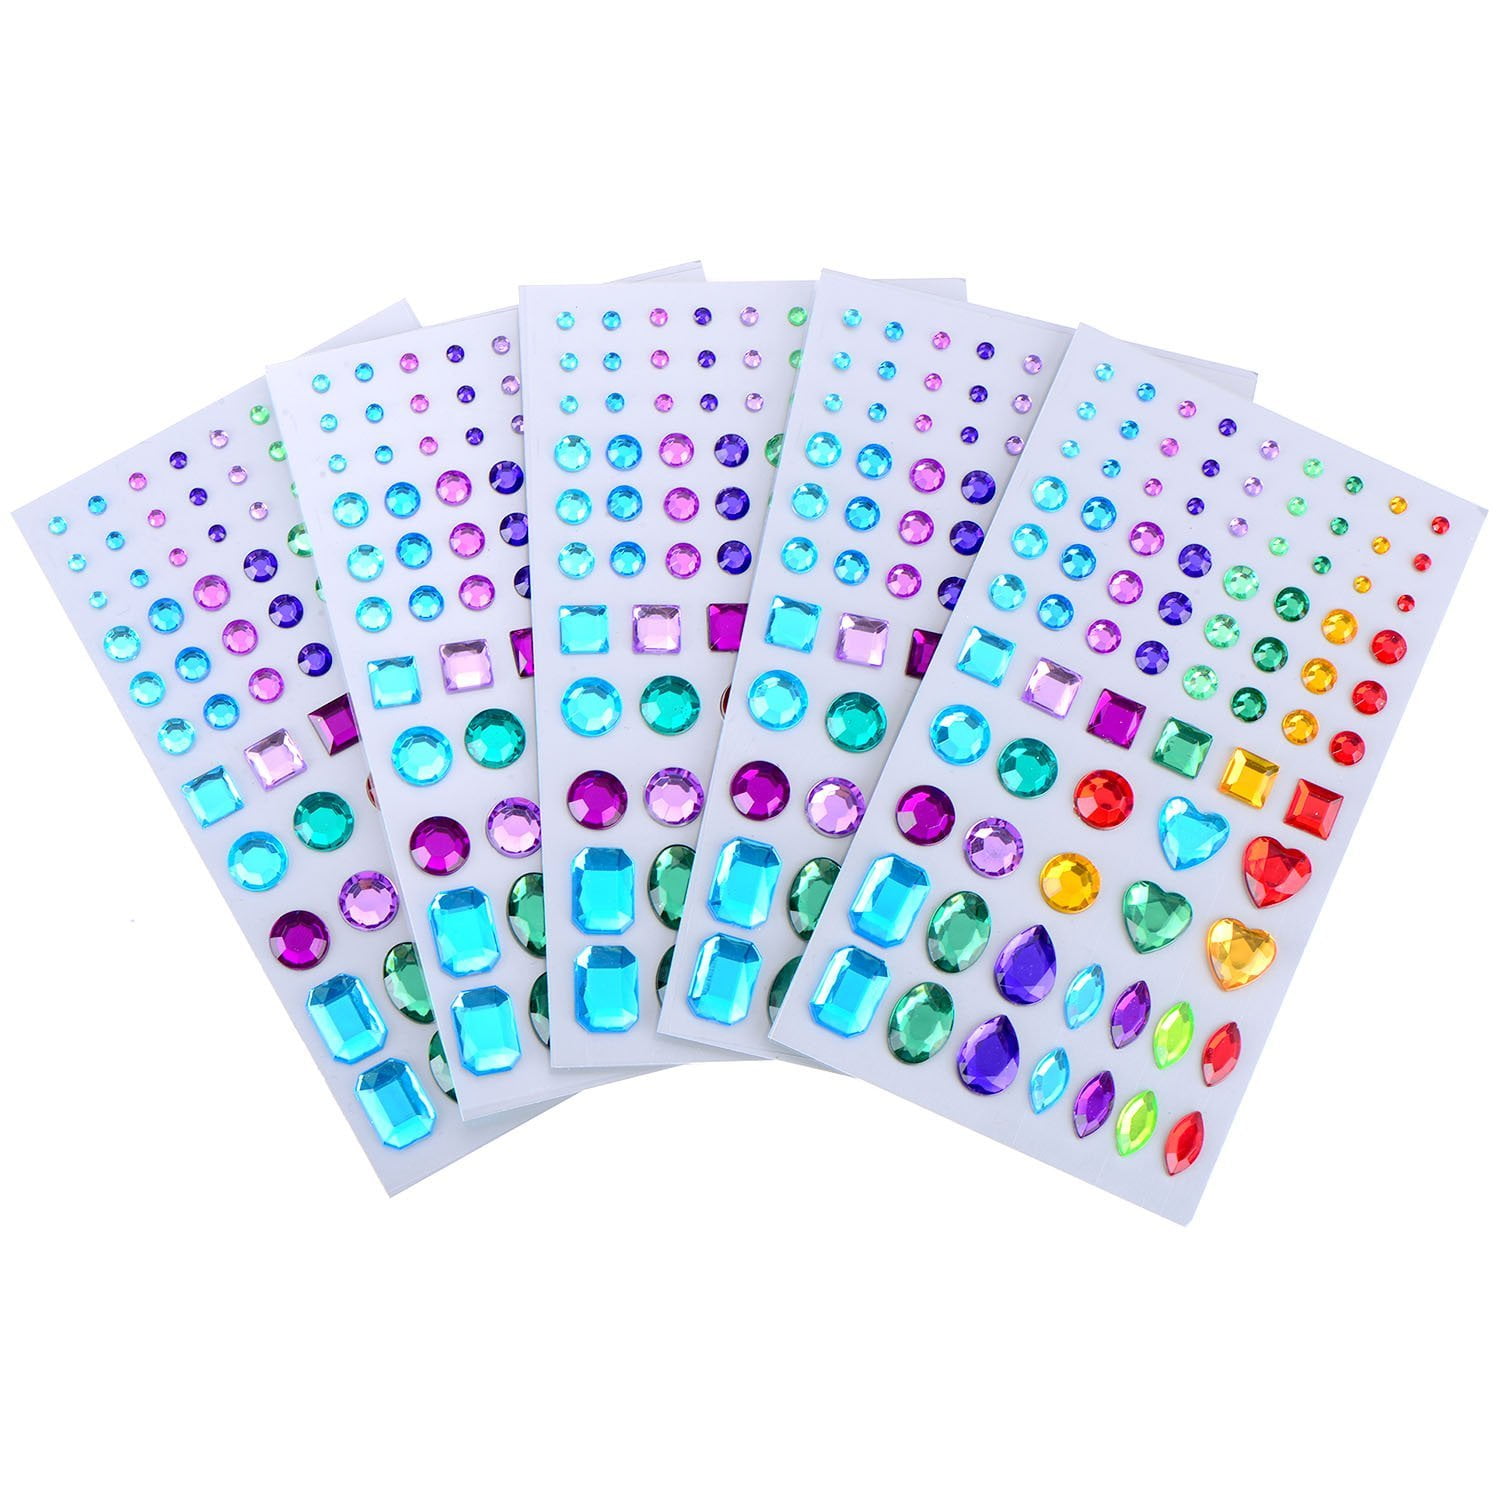 Iridescent Rhinestone Bling Stickers - Stickers - Paper Crafting - Hobby -  Craft Supplies - Factory Direct Craft